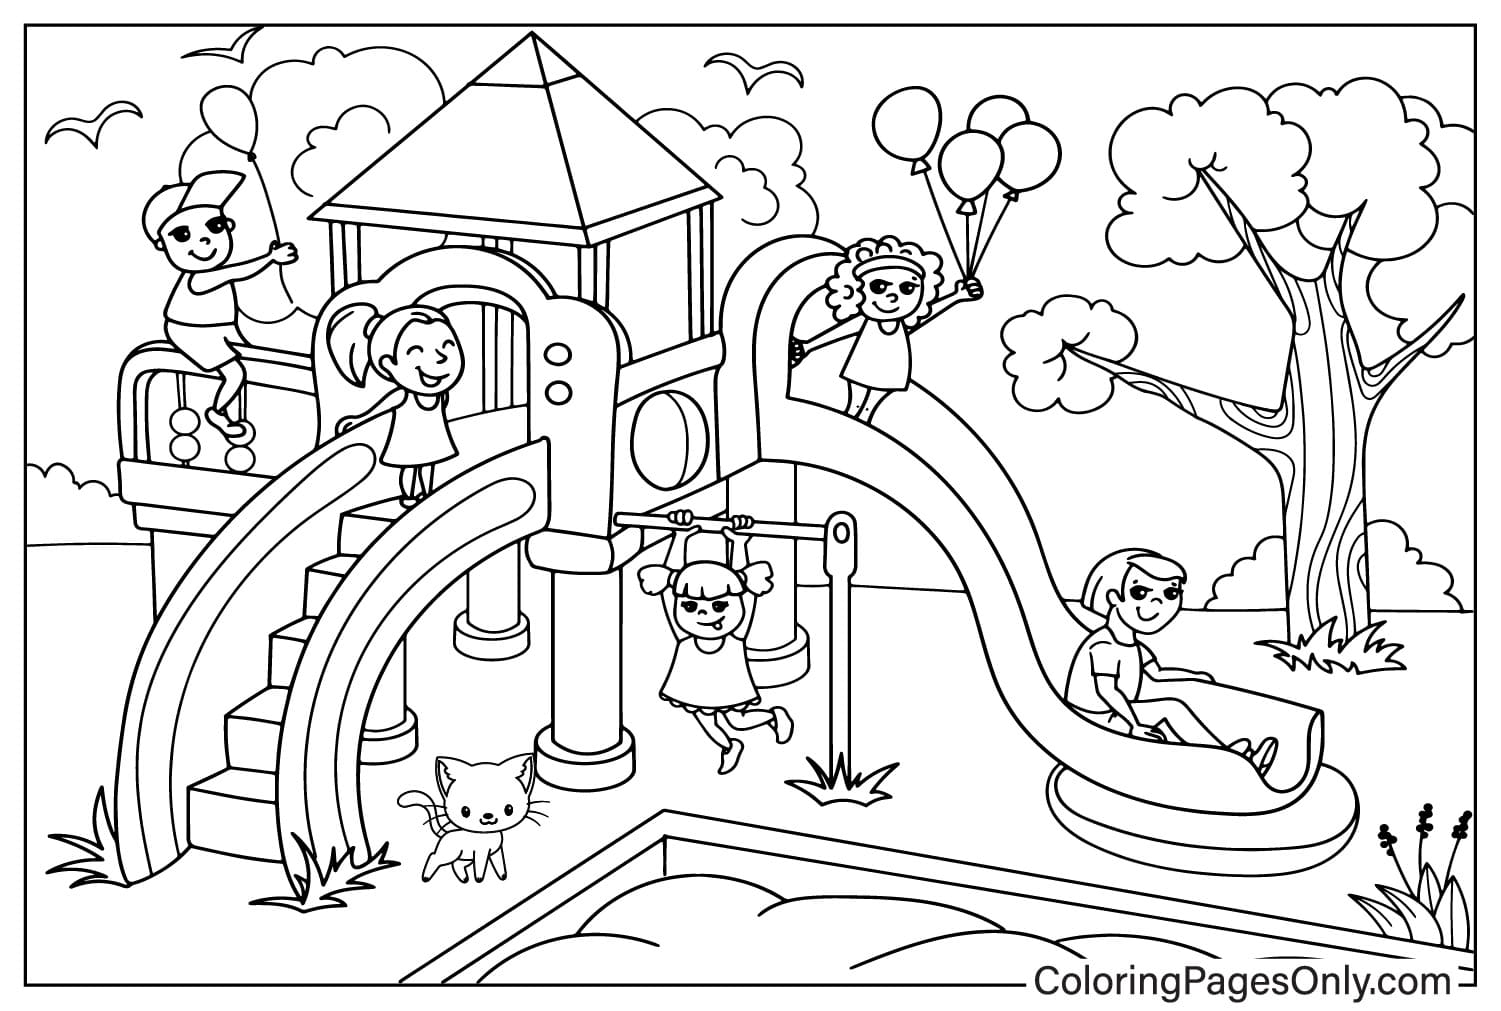 Playground Coloring Sheet for Kids Coloring Page